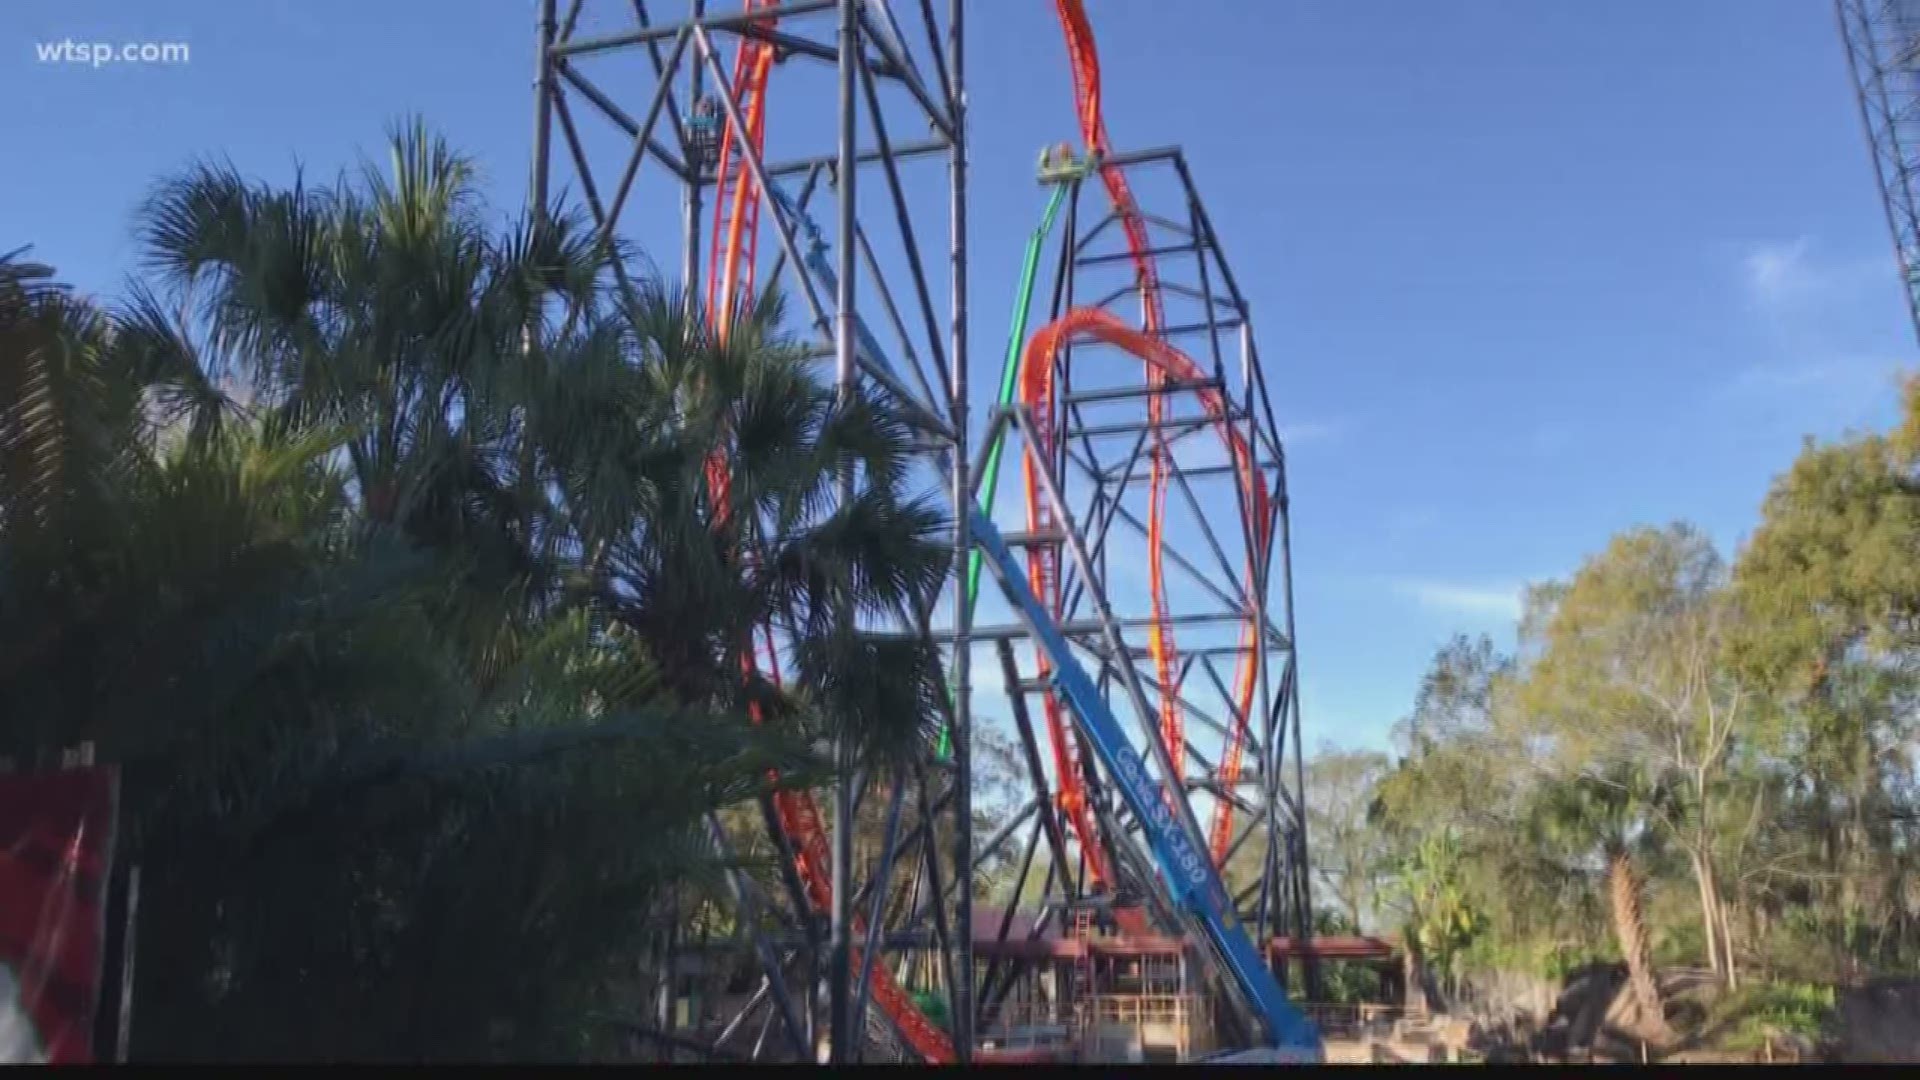 The ride will be Florida's largest launch coaster and is set to open in Spring 2019.